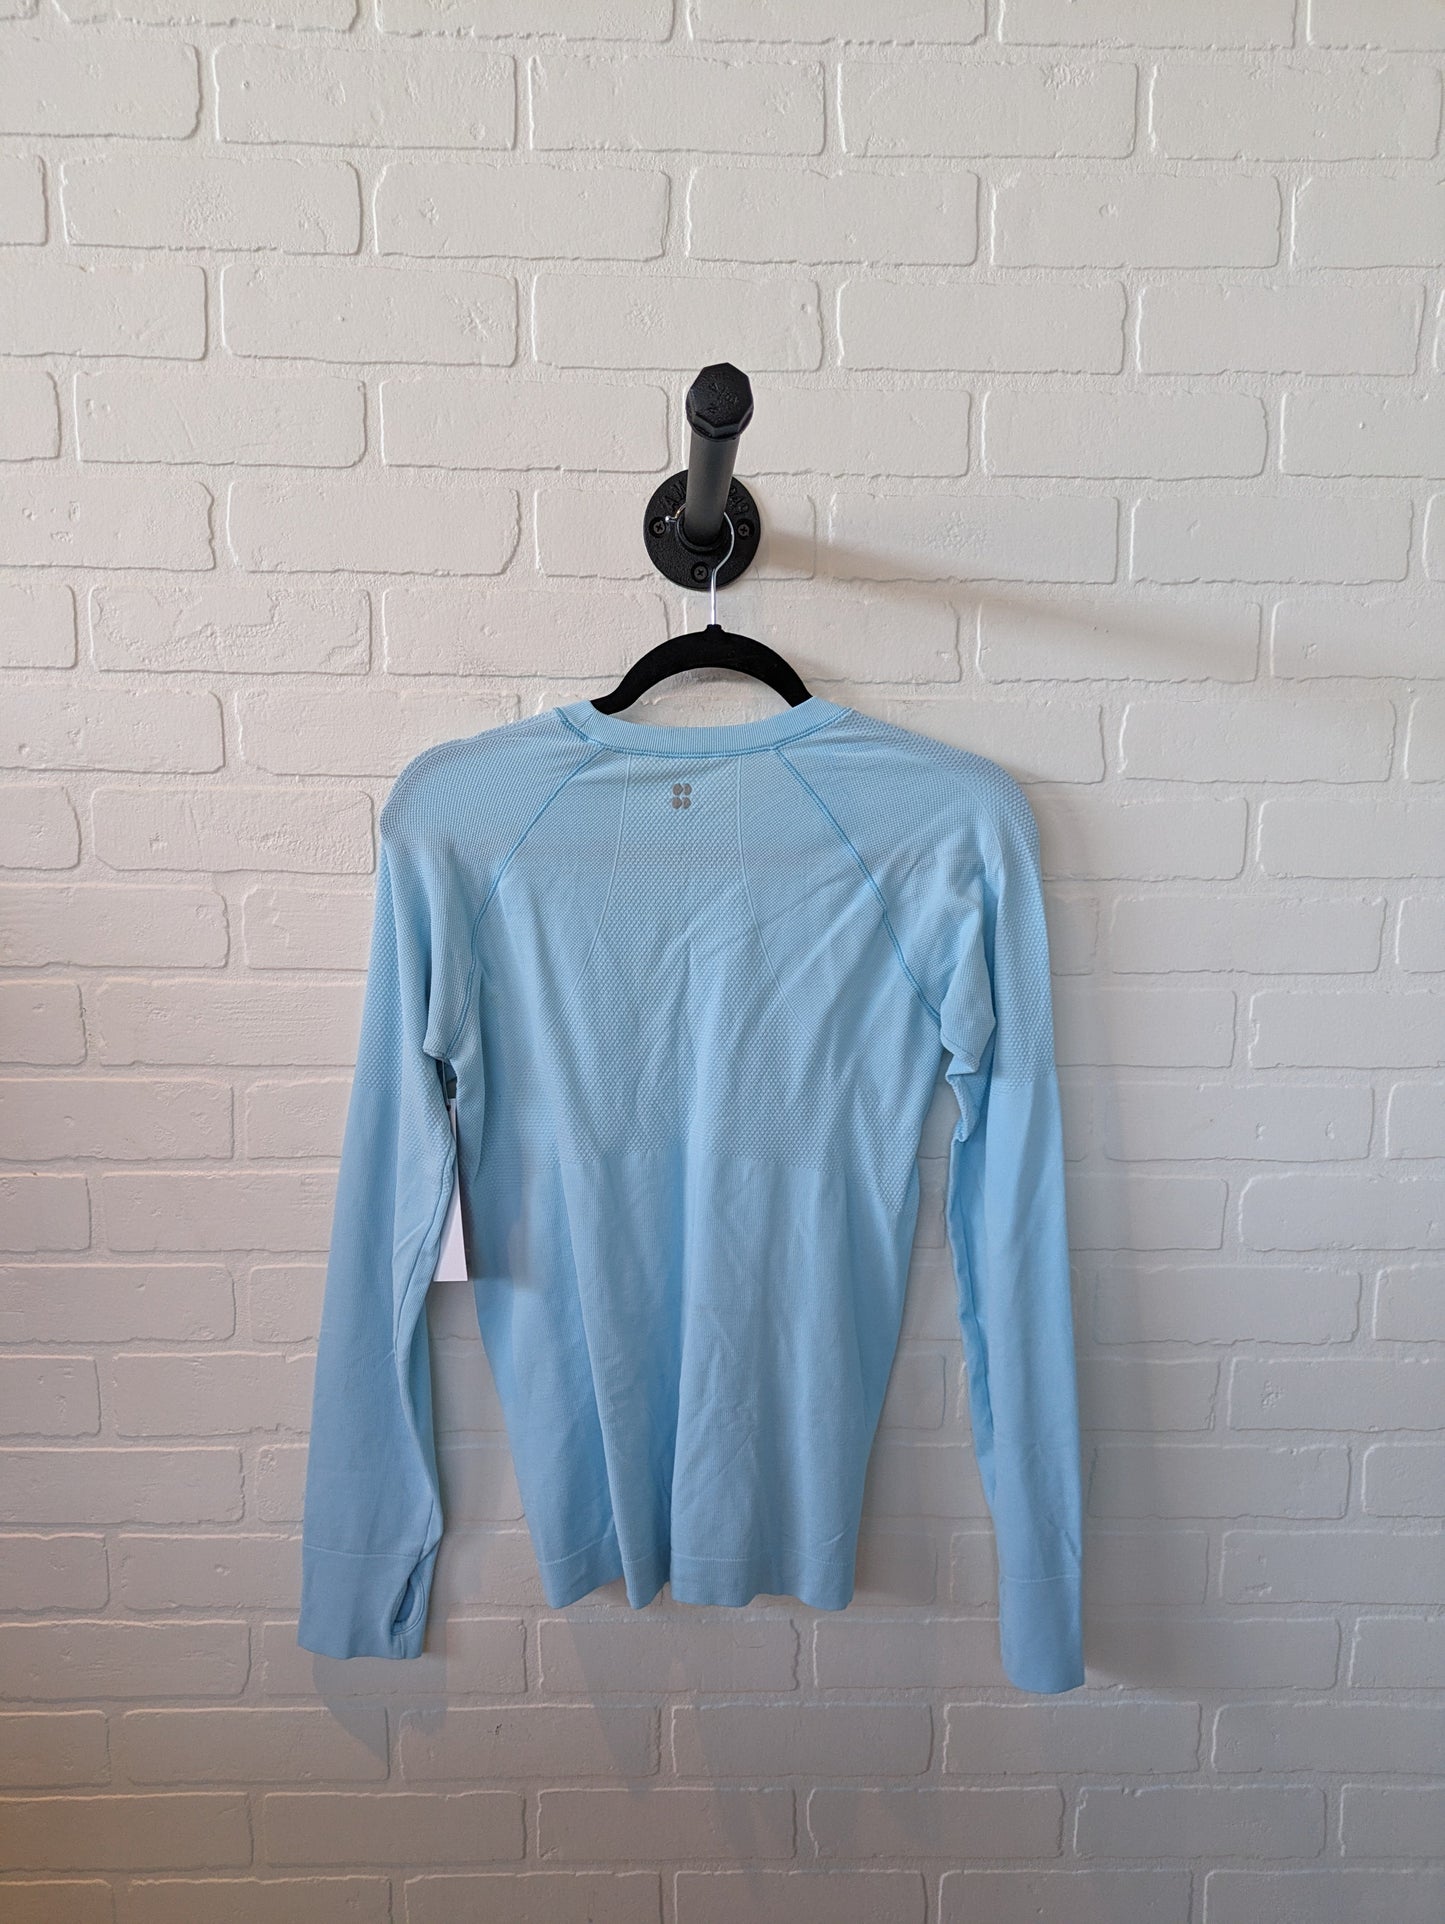 Athletic Top Long Sleeve Collar By Sweaty Betty  Size: L